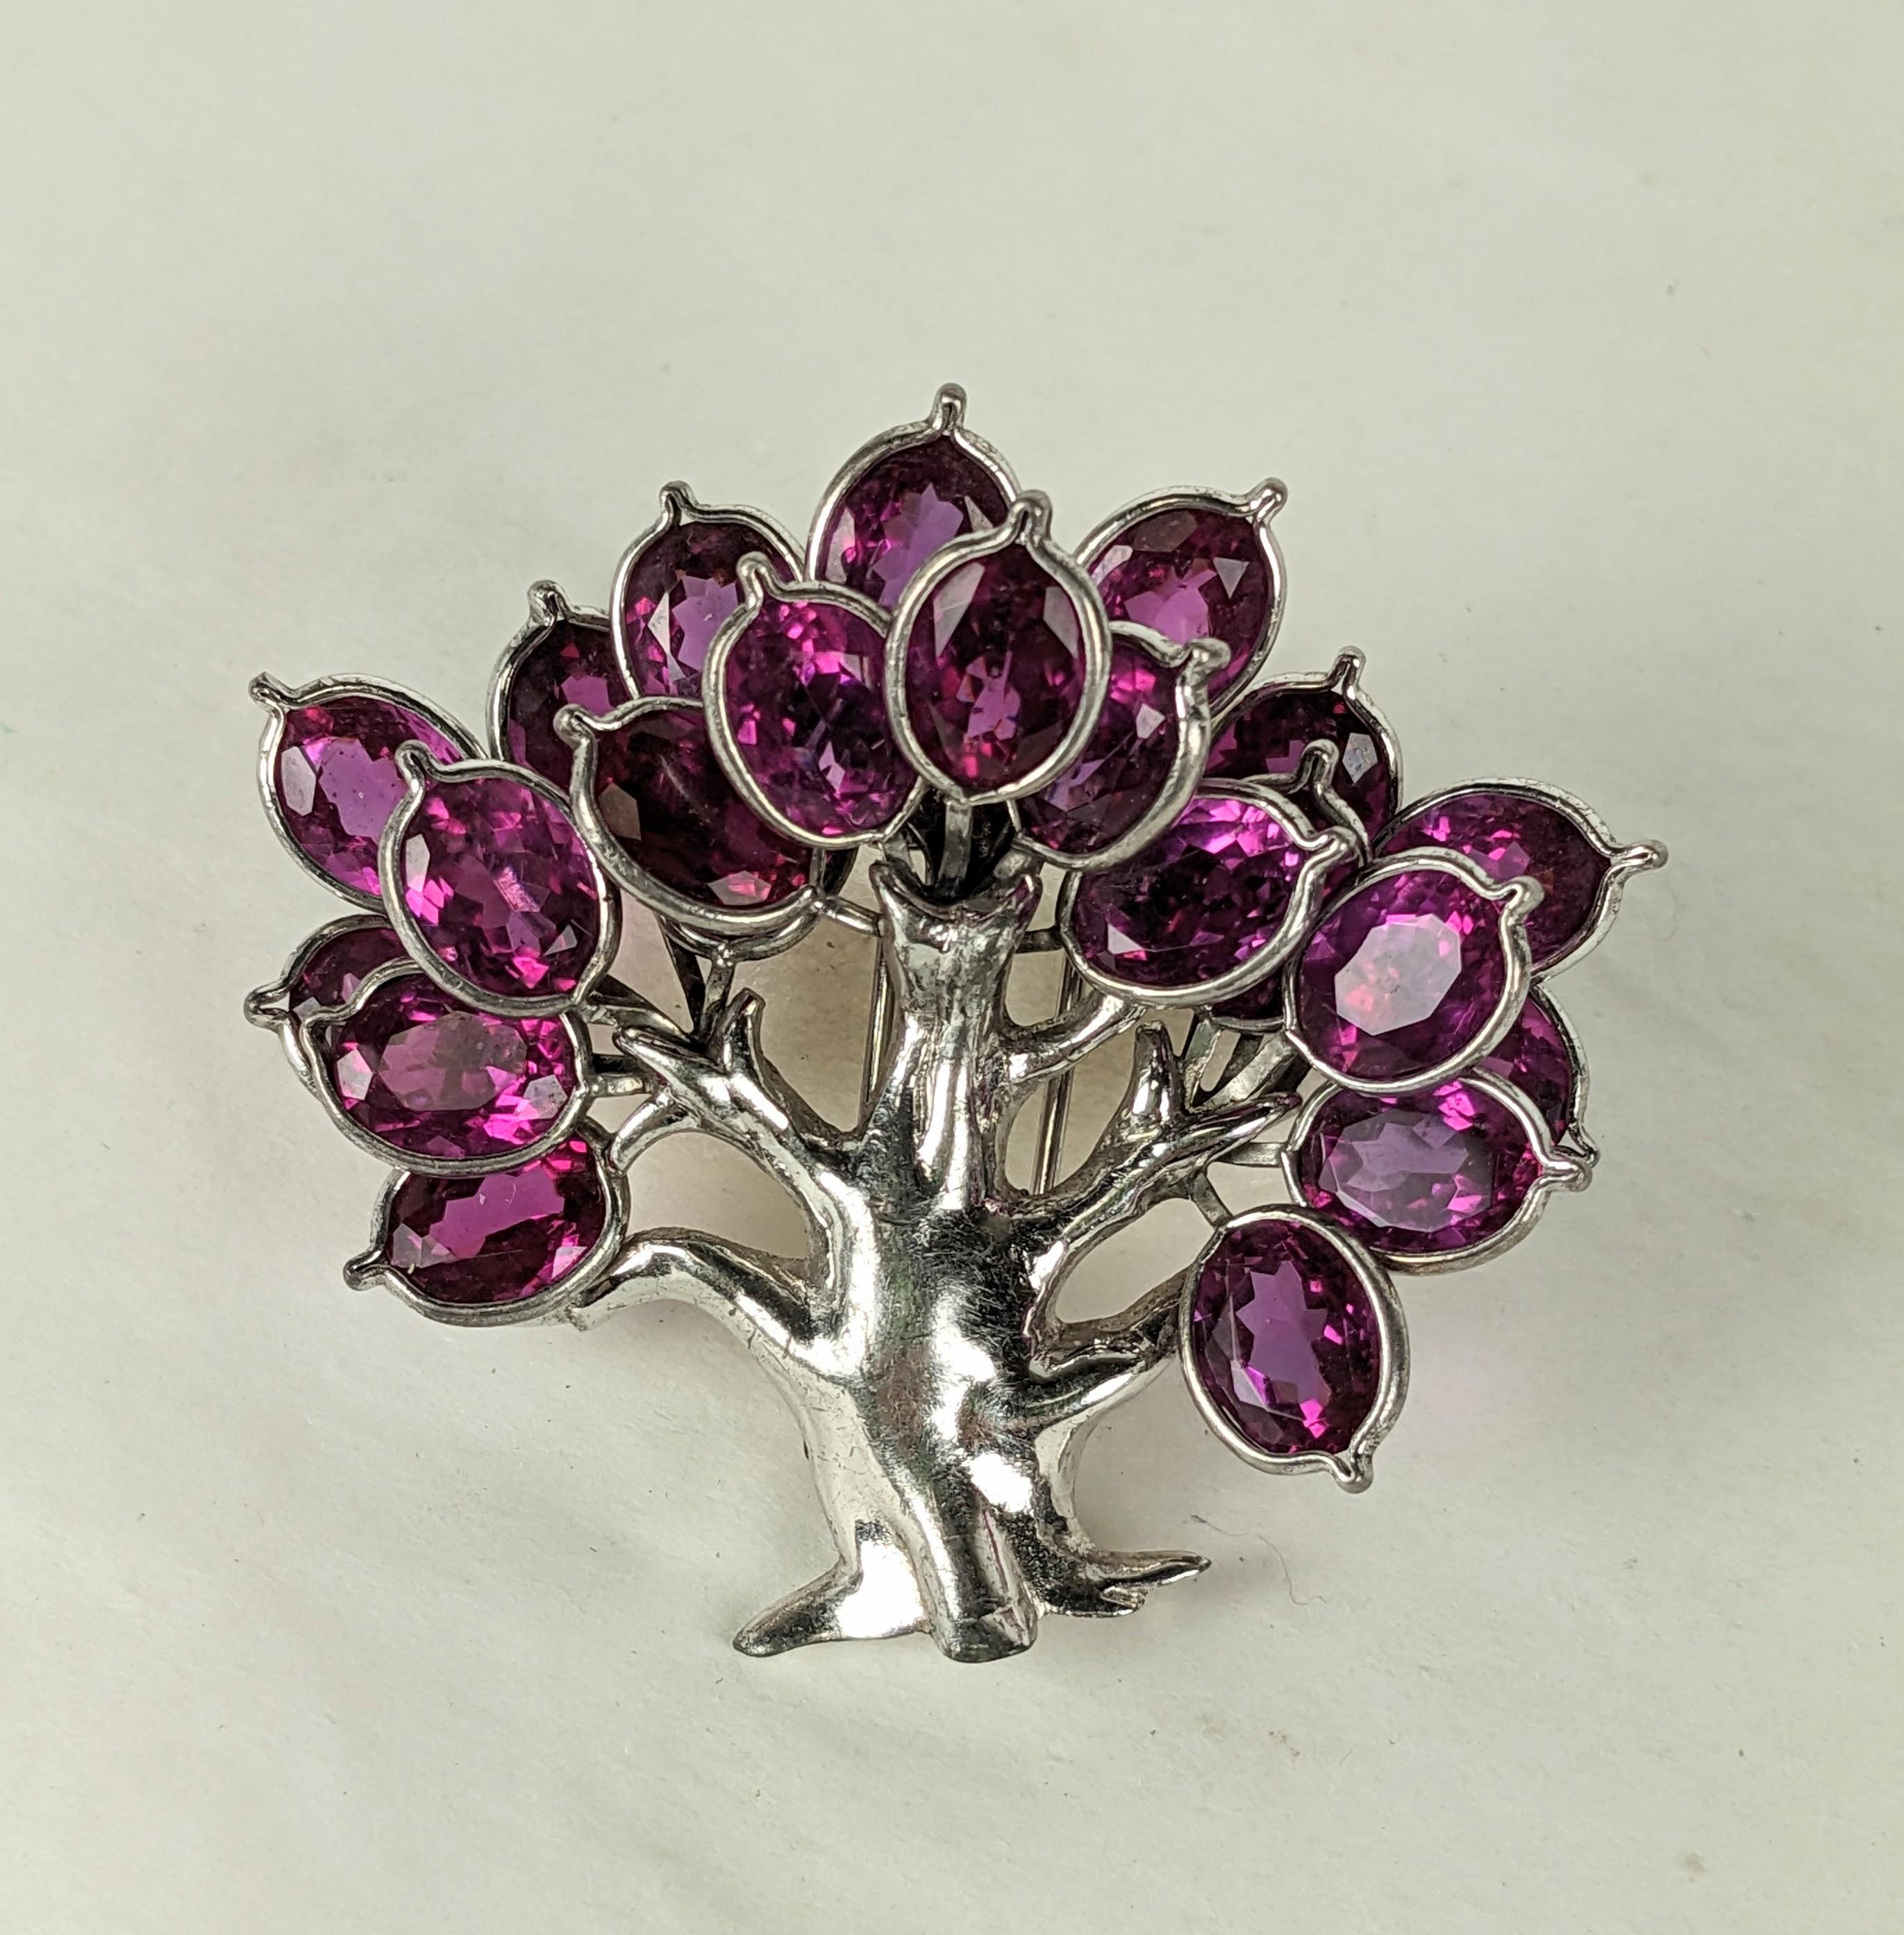 Rare Pennino Magenta Paste Clip brooch of oval collet set stones which forms the leaves in the tree. High rhodium finish from the Art Deco period. 1930's USA.  2.25